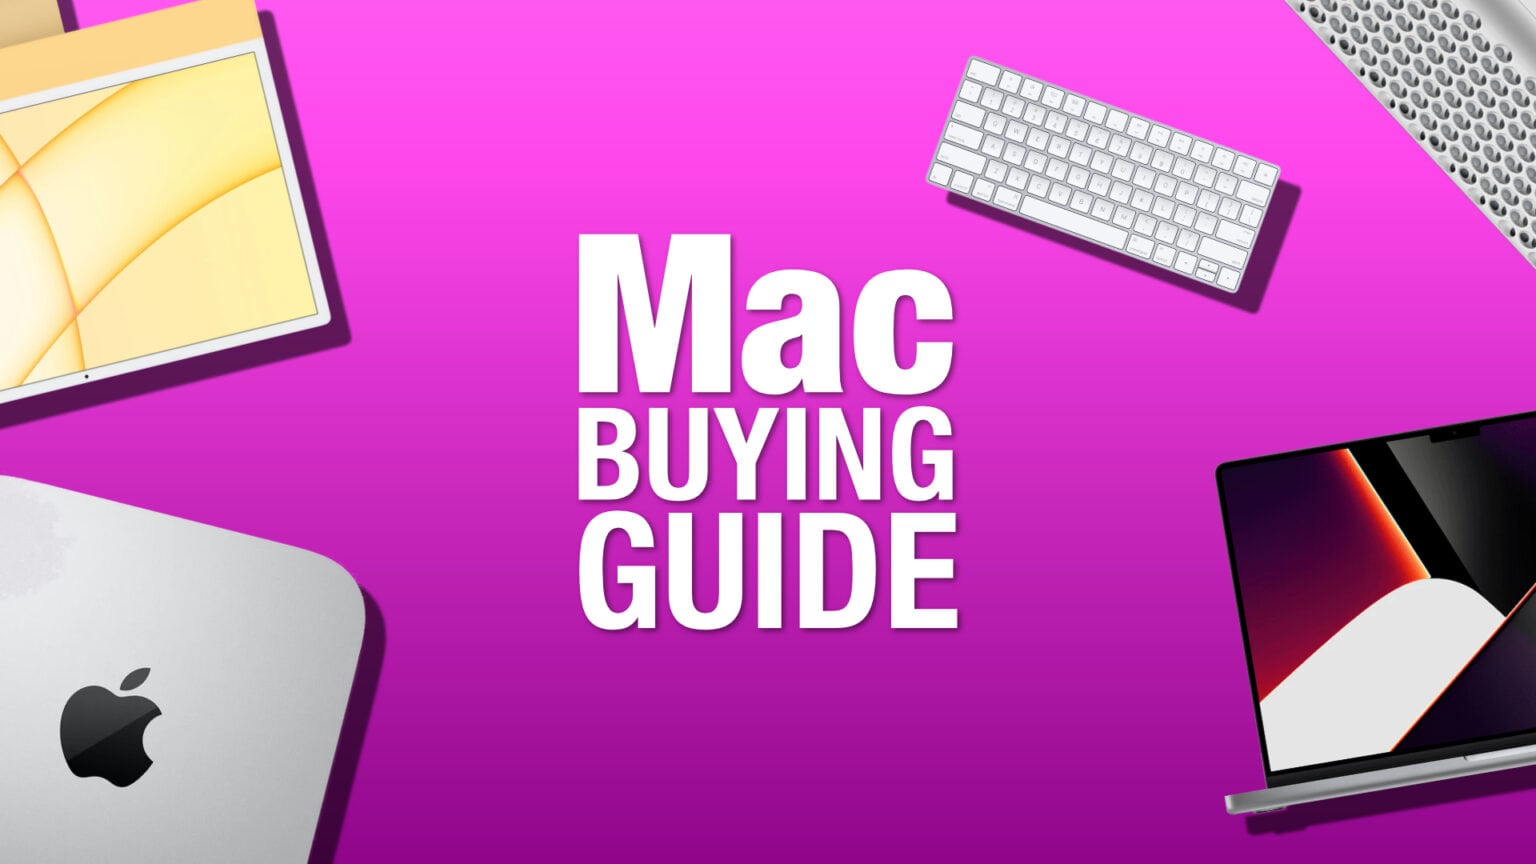 Mac buying guide: Choose the best model and accessories